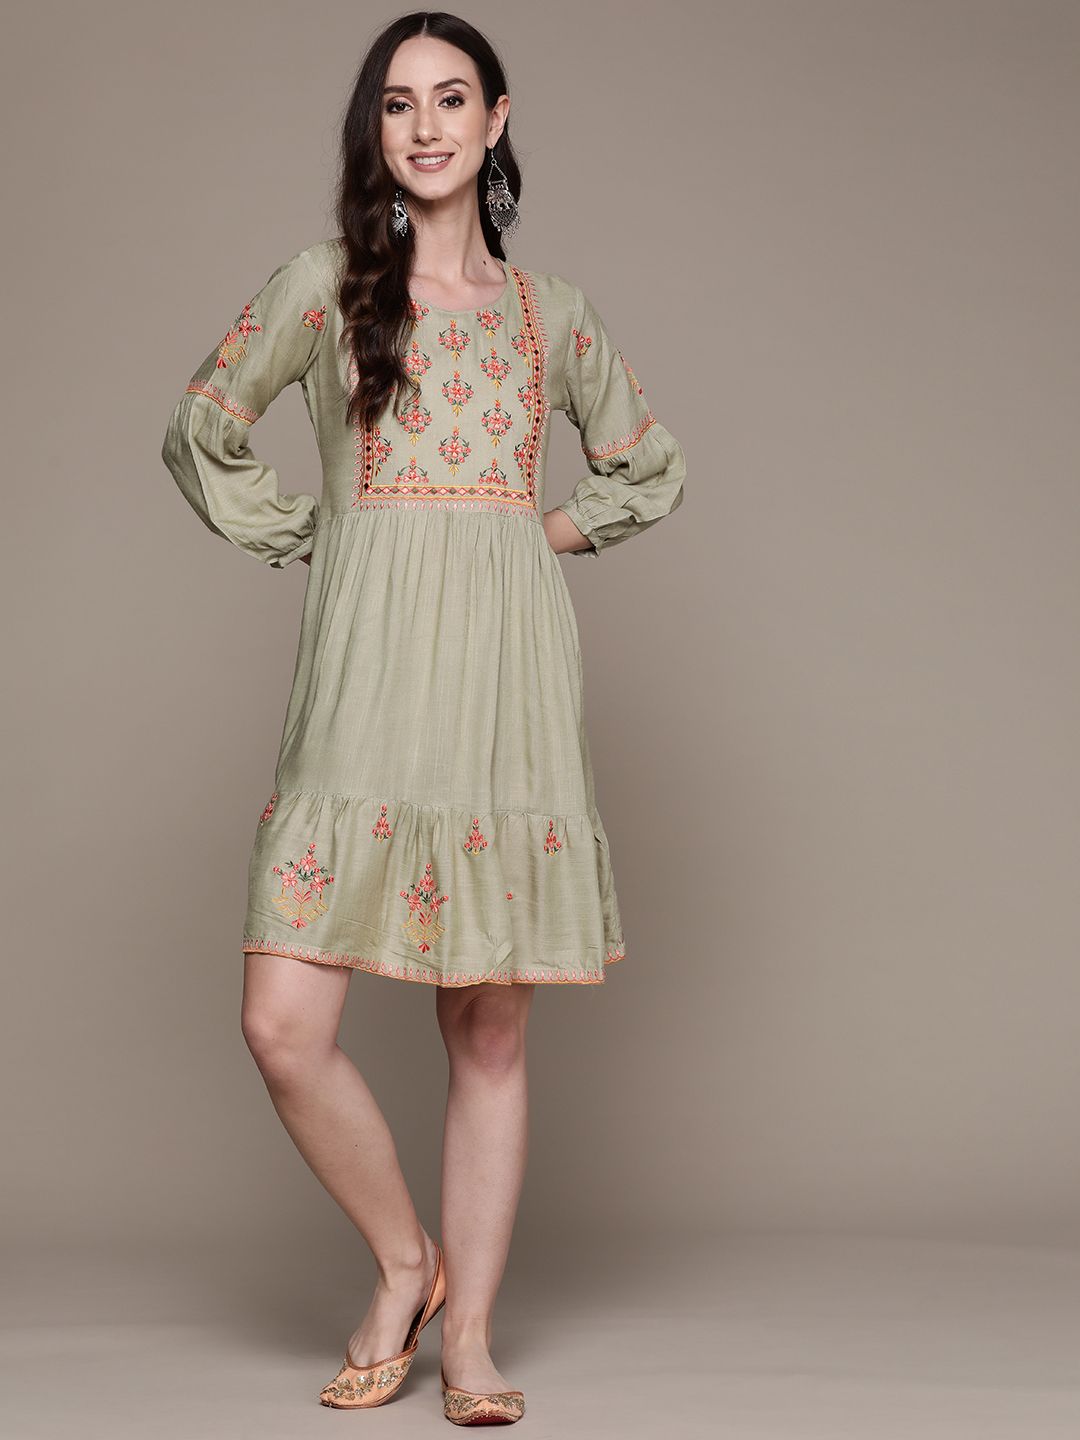 Anubhutee Olive Green Ethnic Motifs Embroidered Dress Price in India